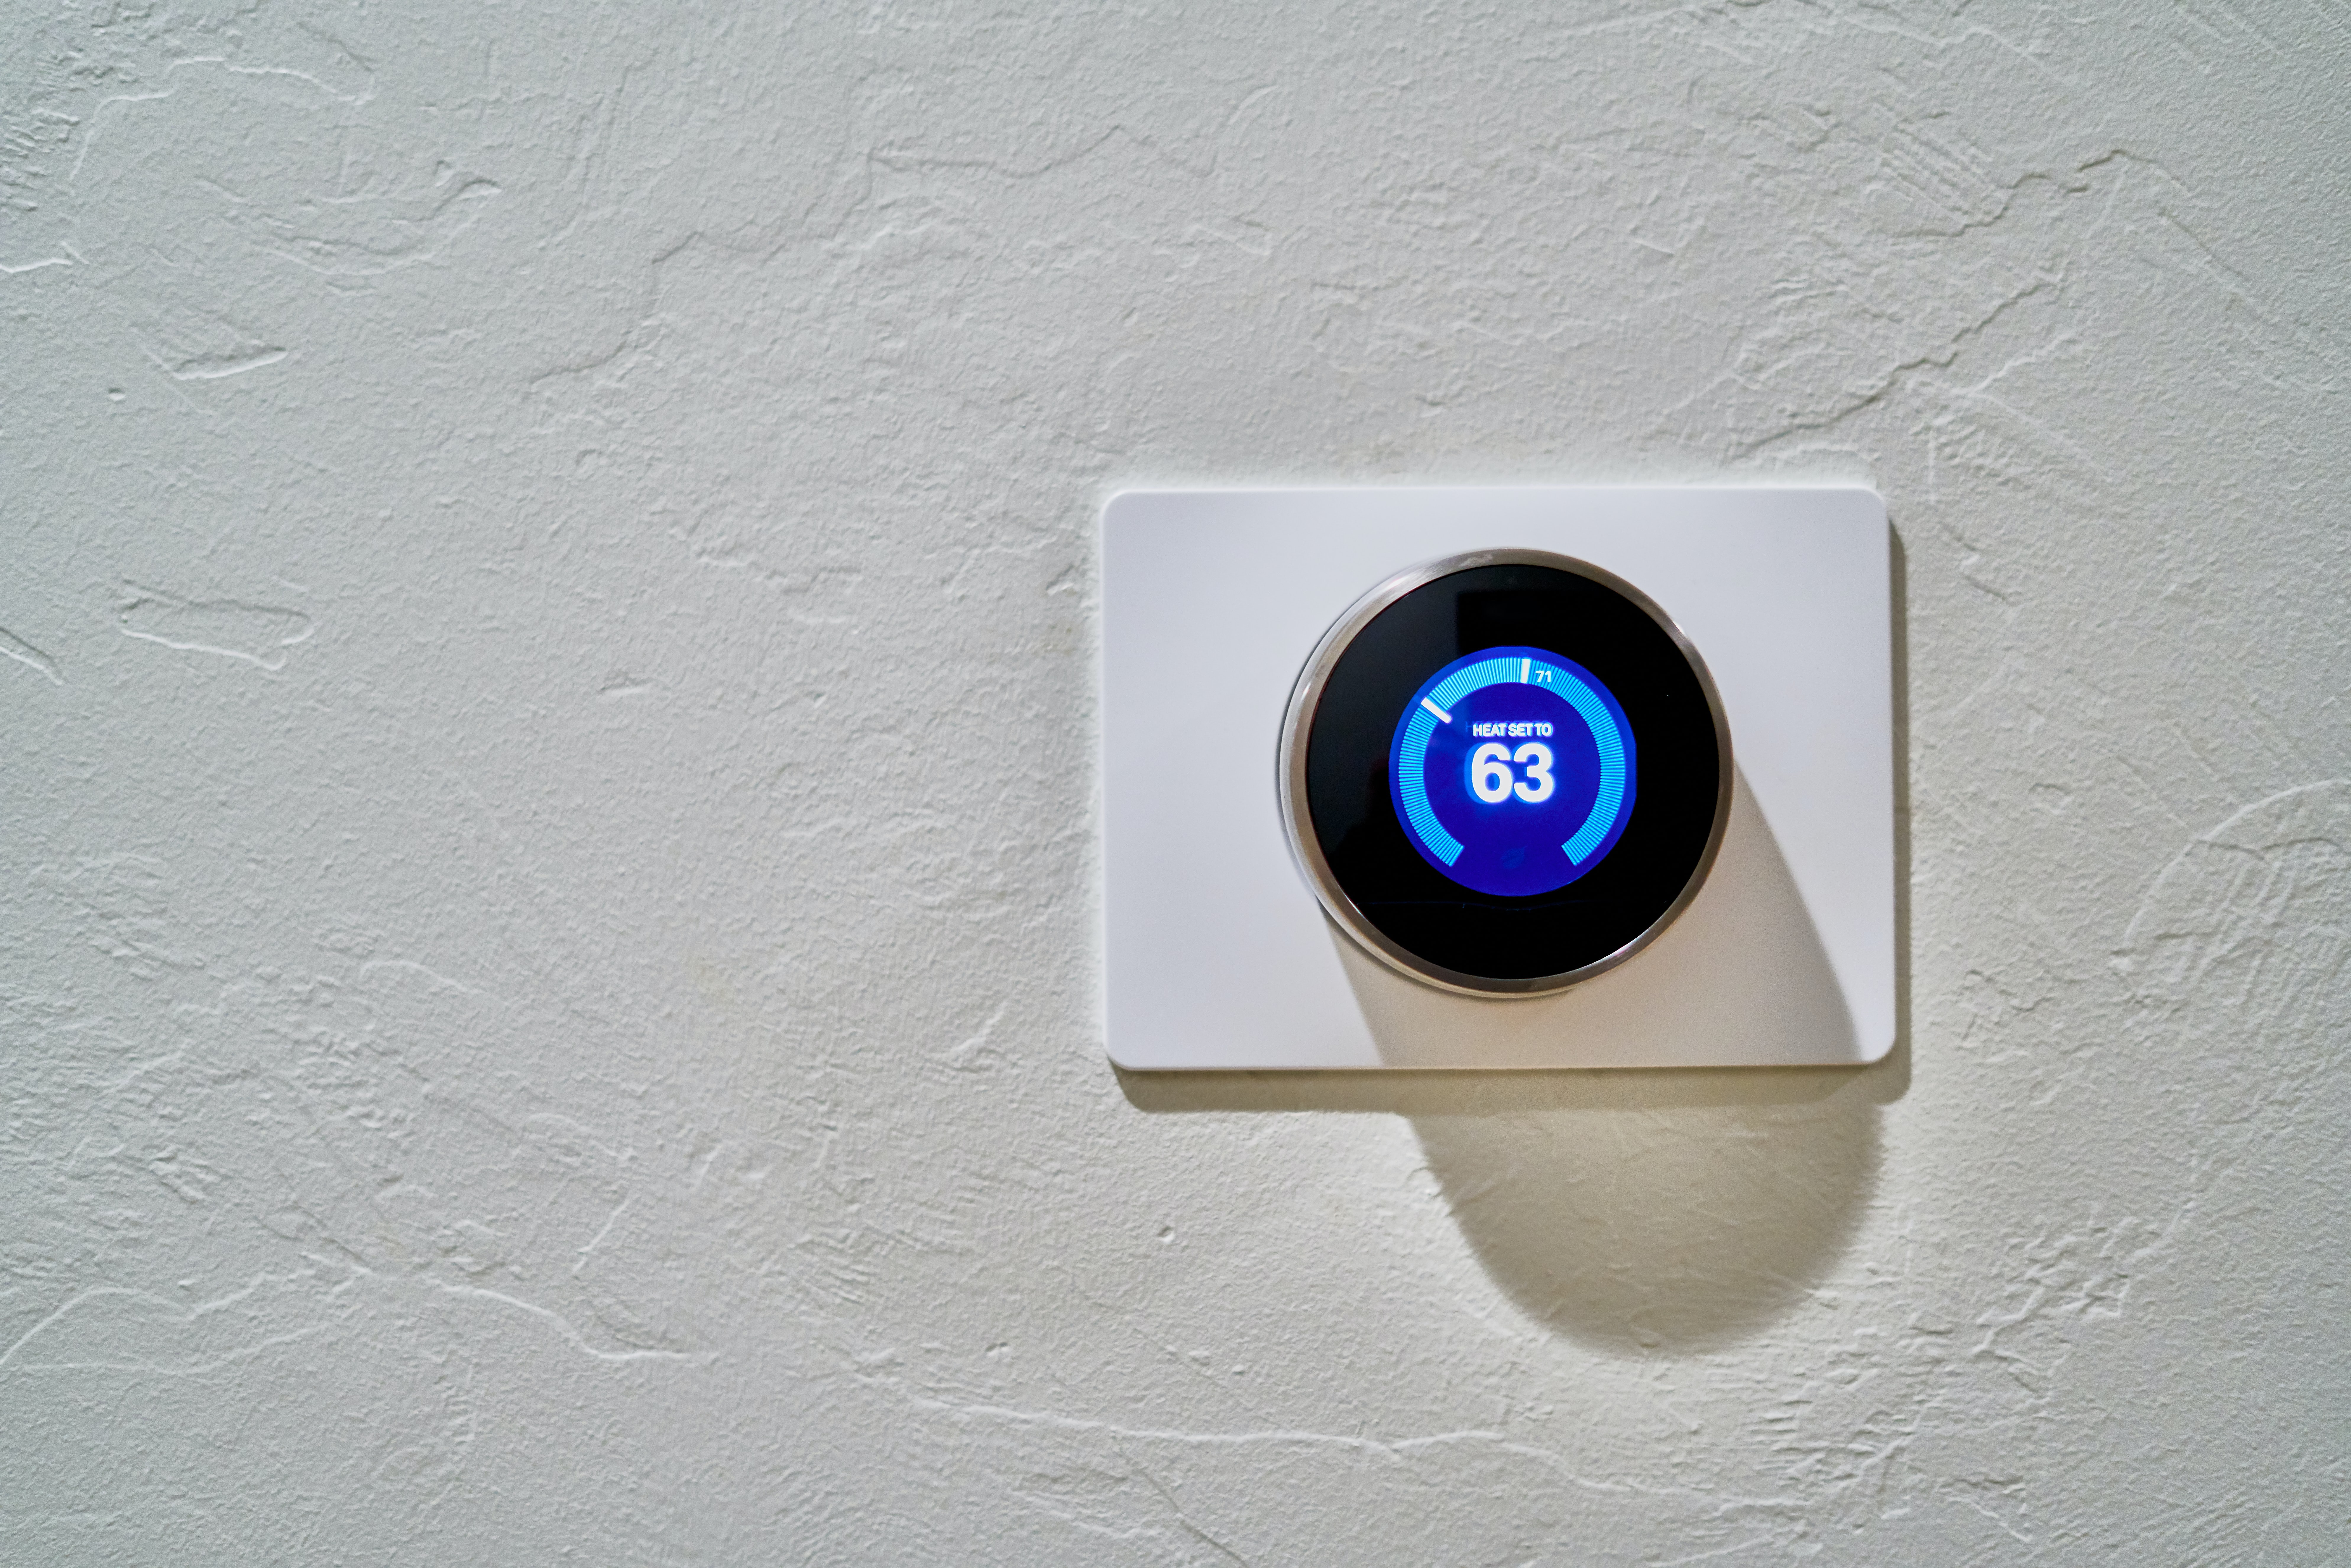 How to Pick the Best Location for Your Thermostat